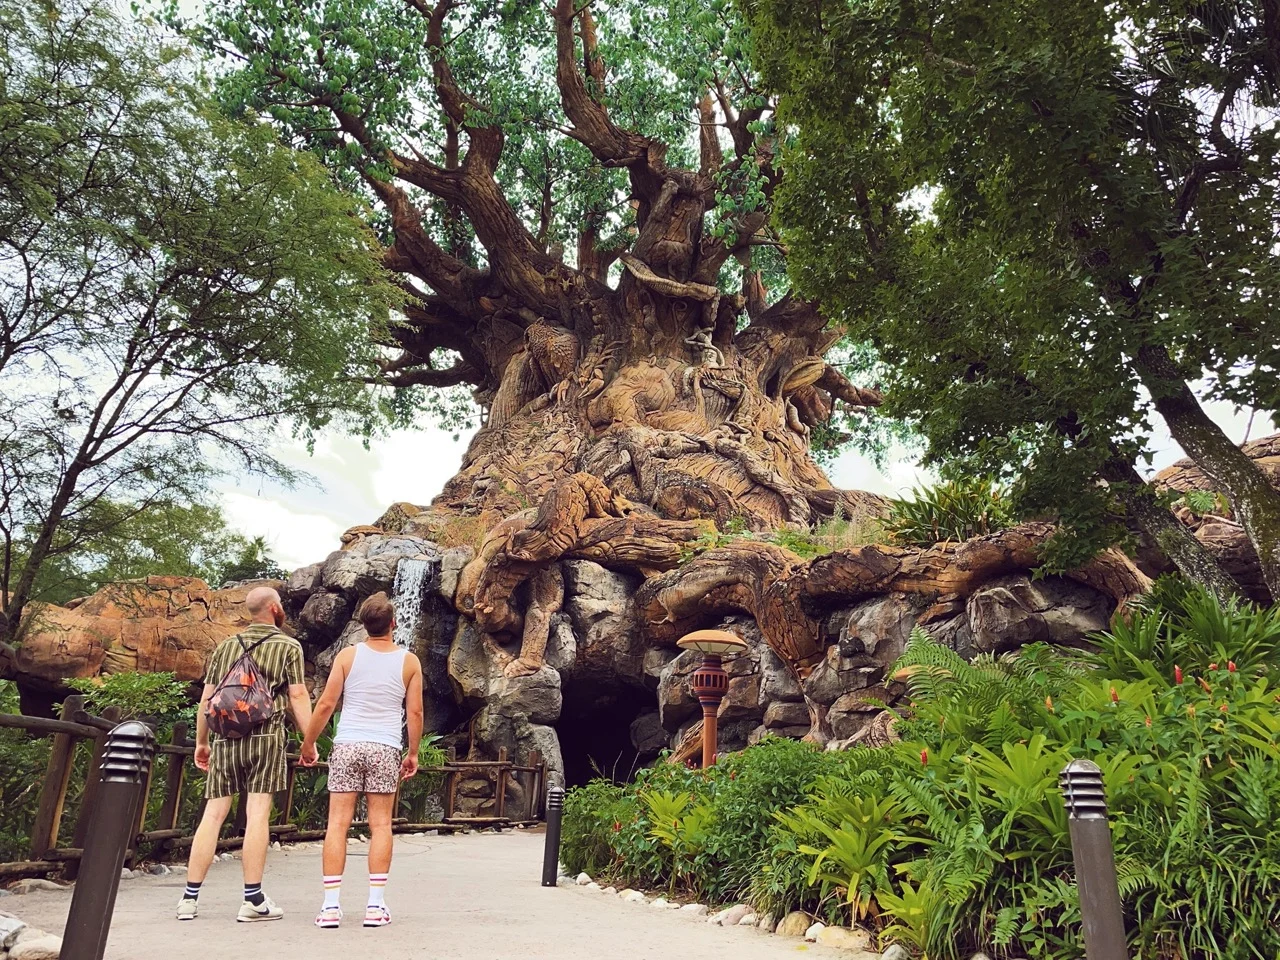 Hand in Hand in Disney's Animal Kingdom - Disney supporting LGBT Community with the new Disney Pride Collection © Coupleofmen.com